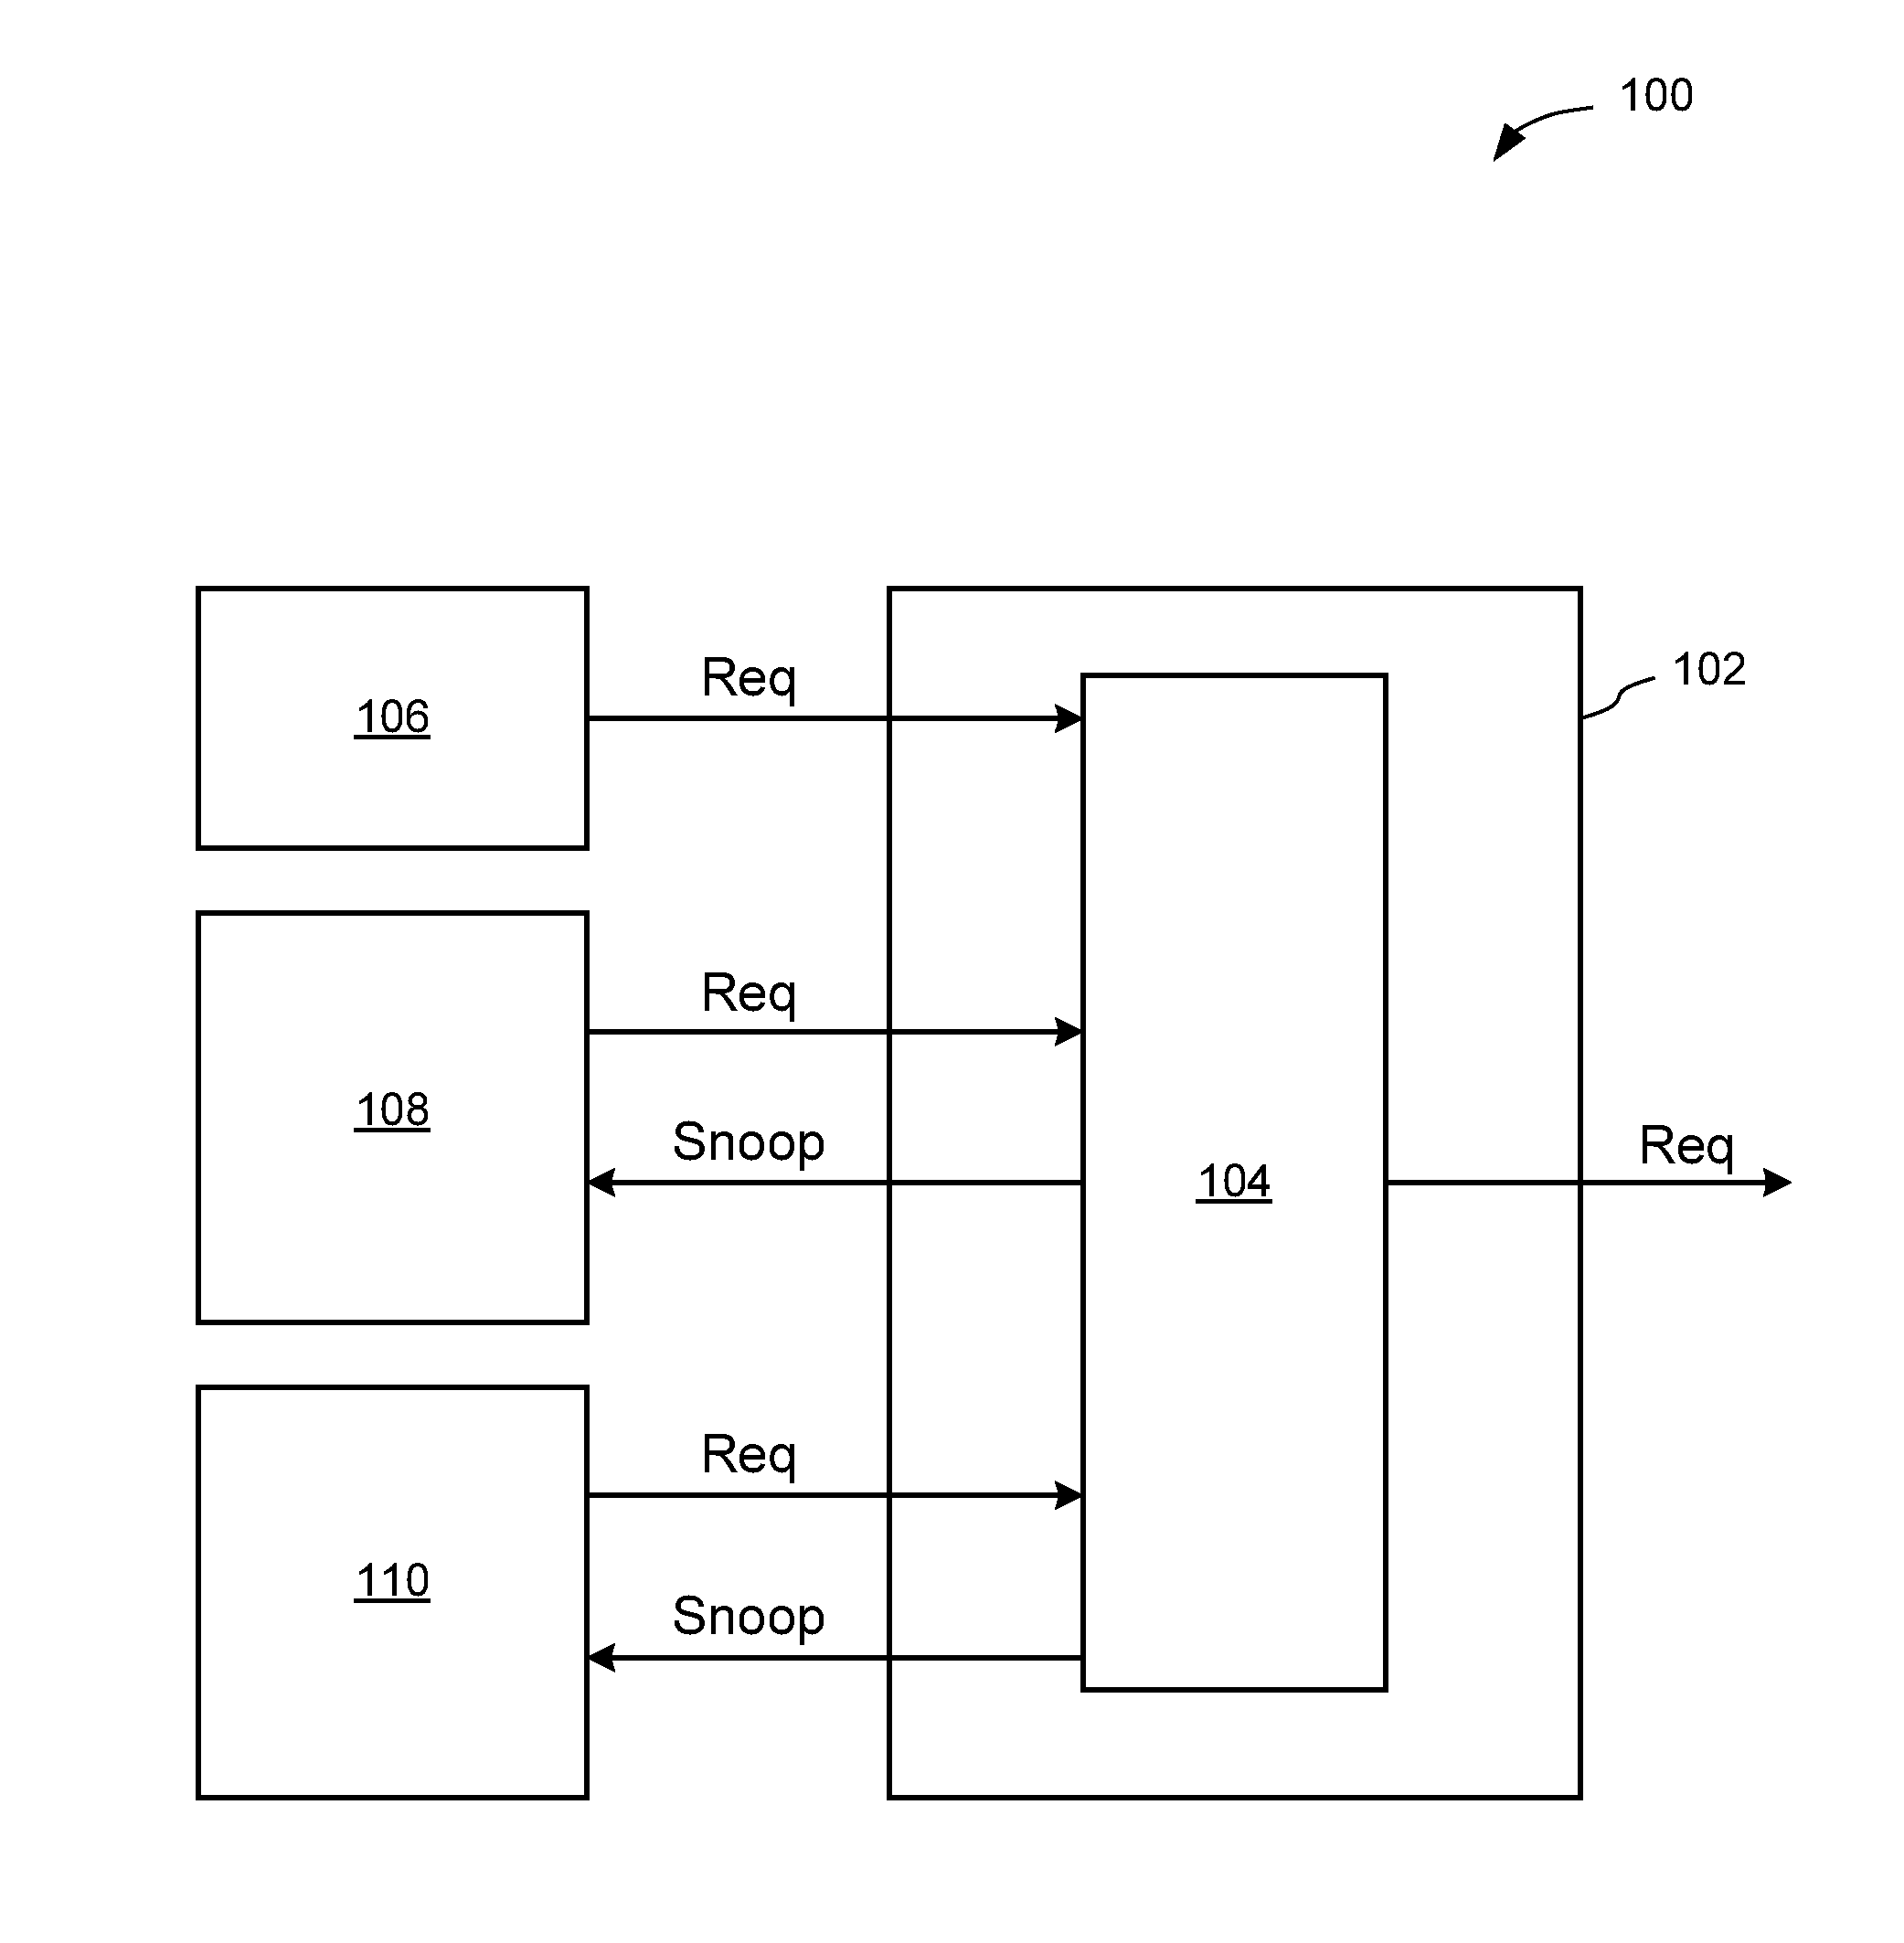 Simplified controller with partial coherency